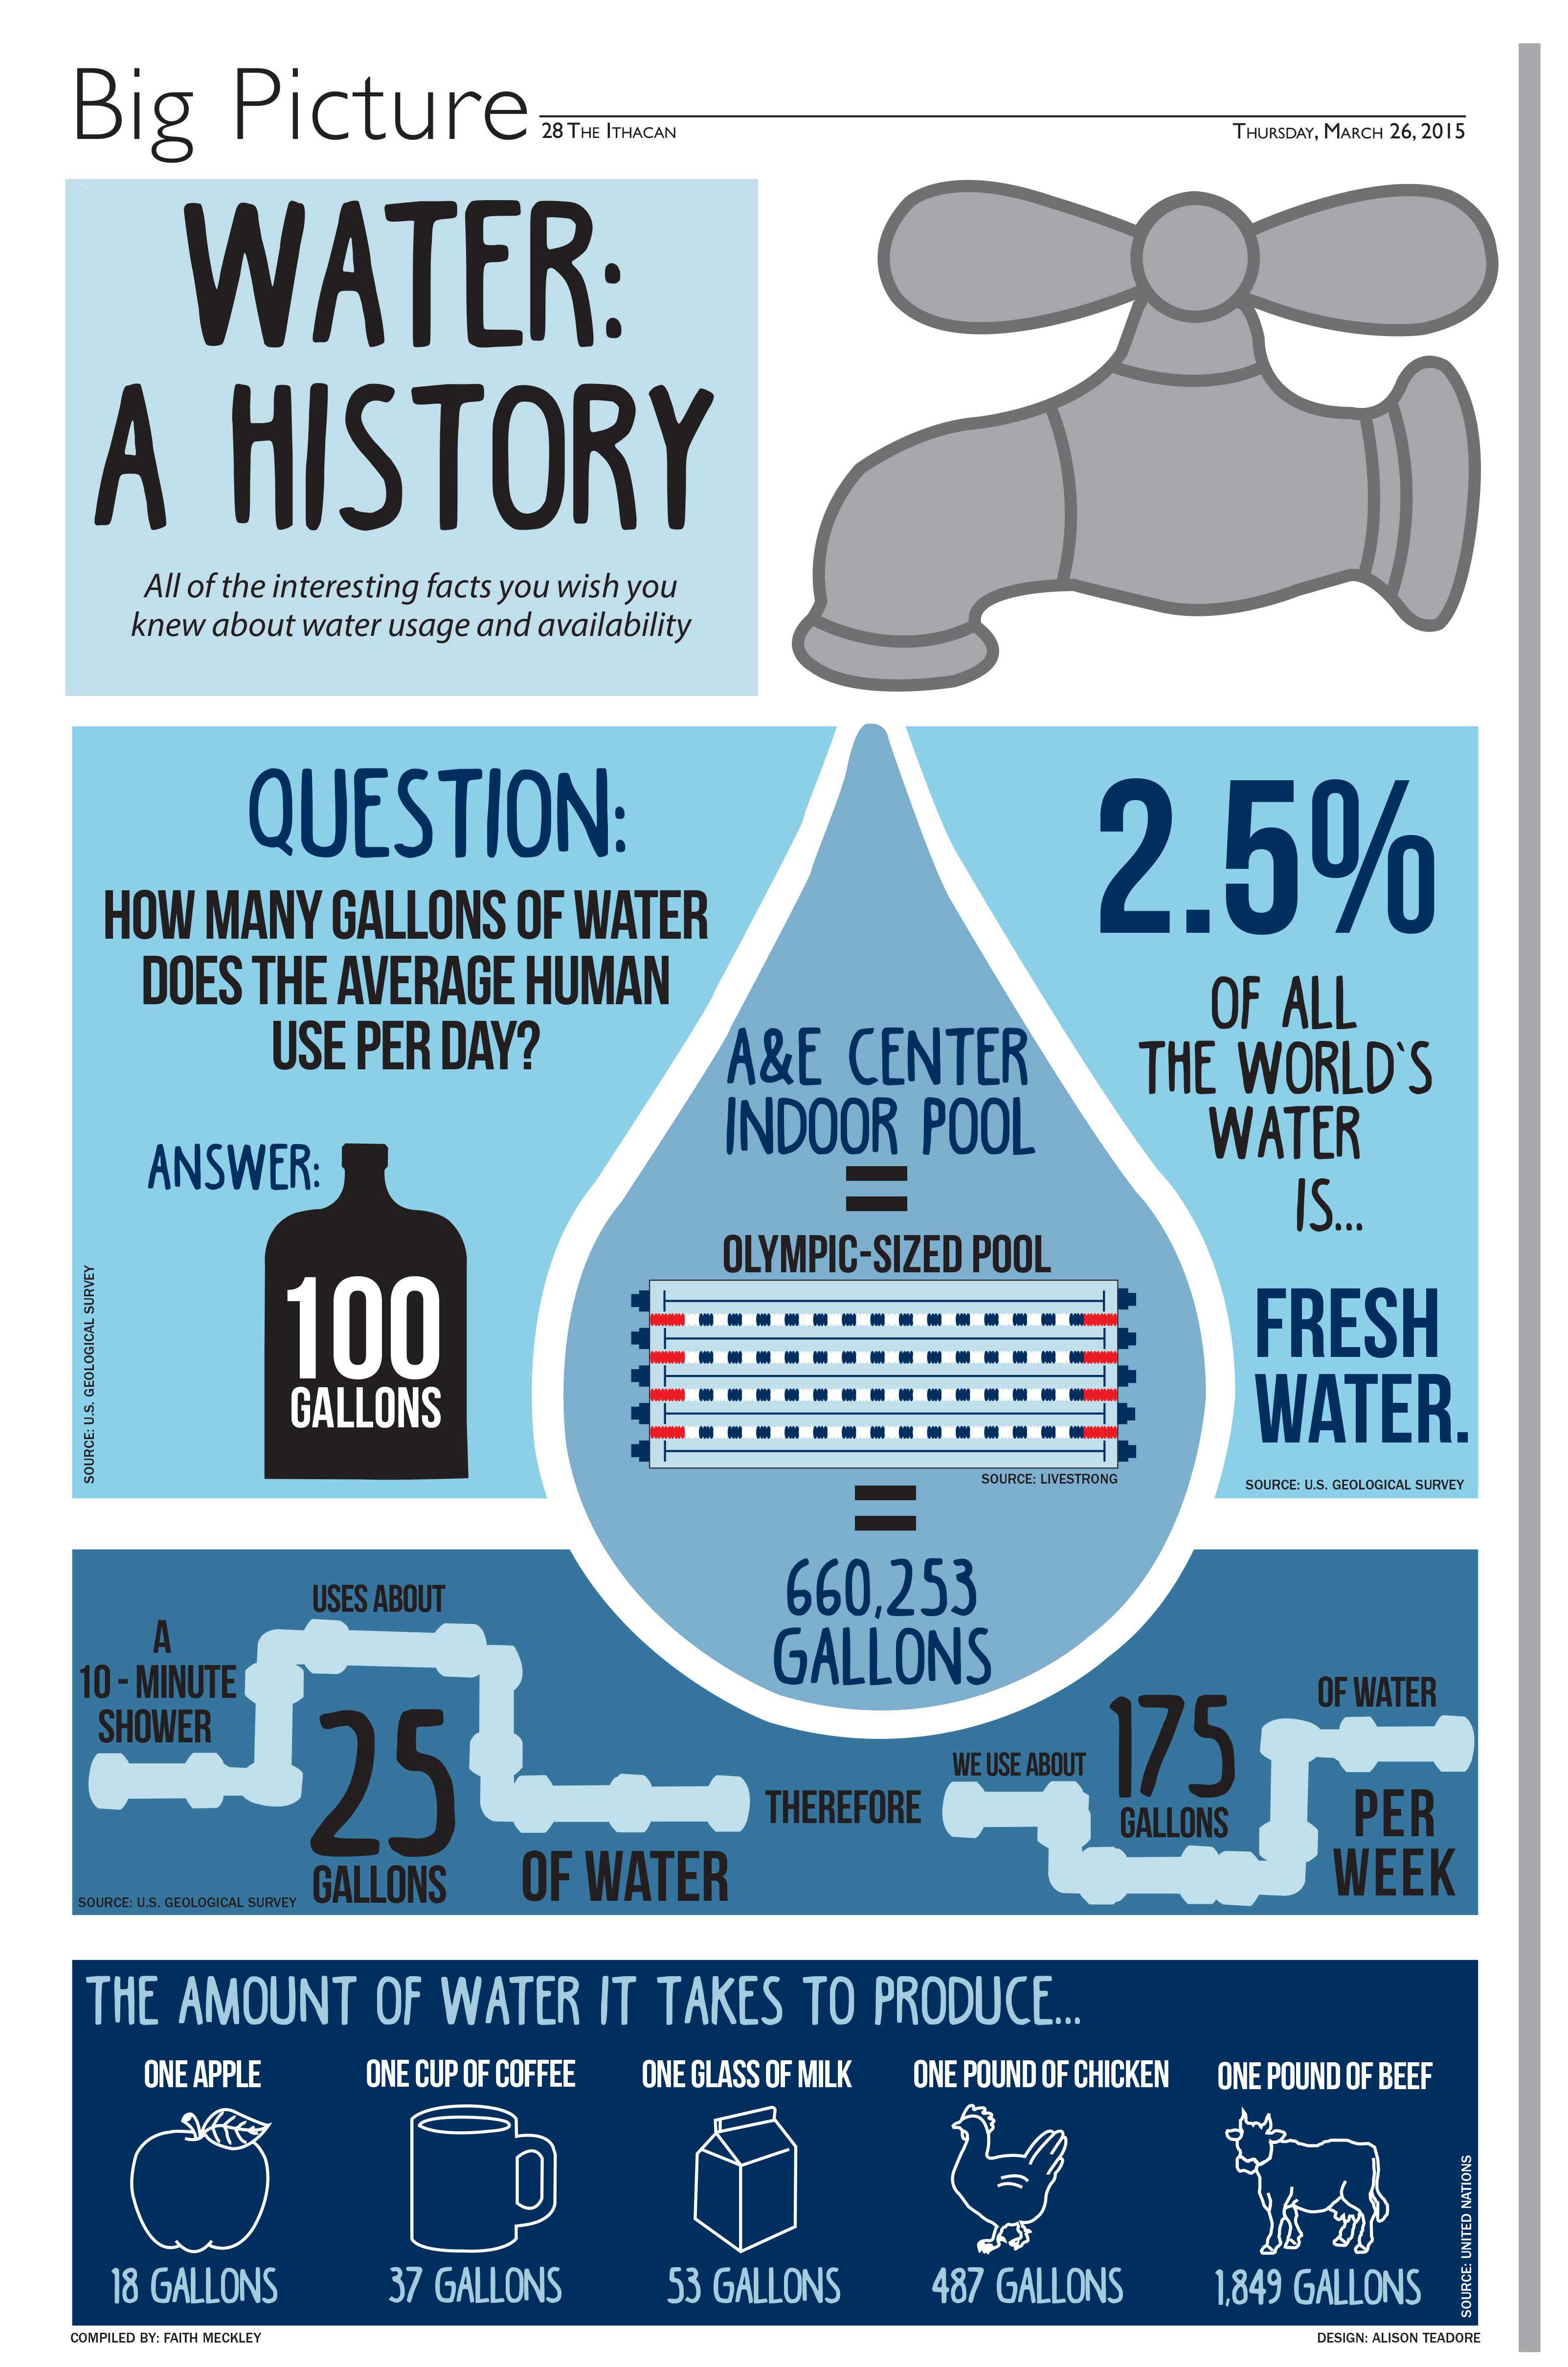 Water: A History